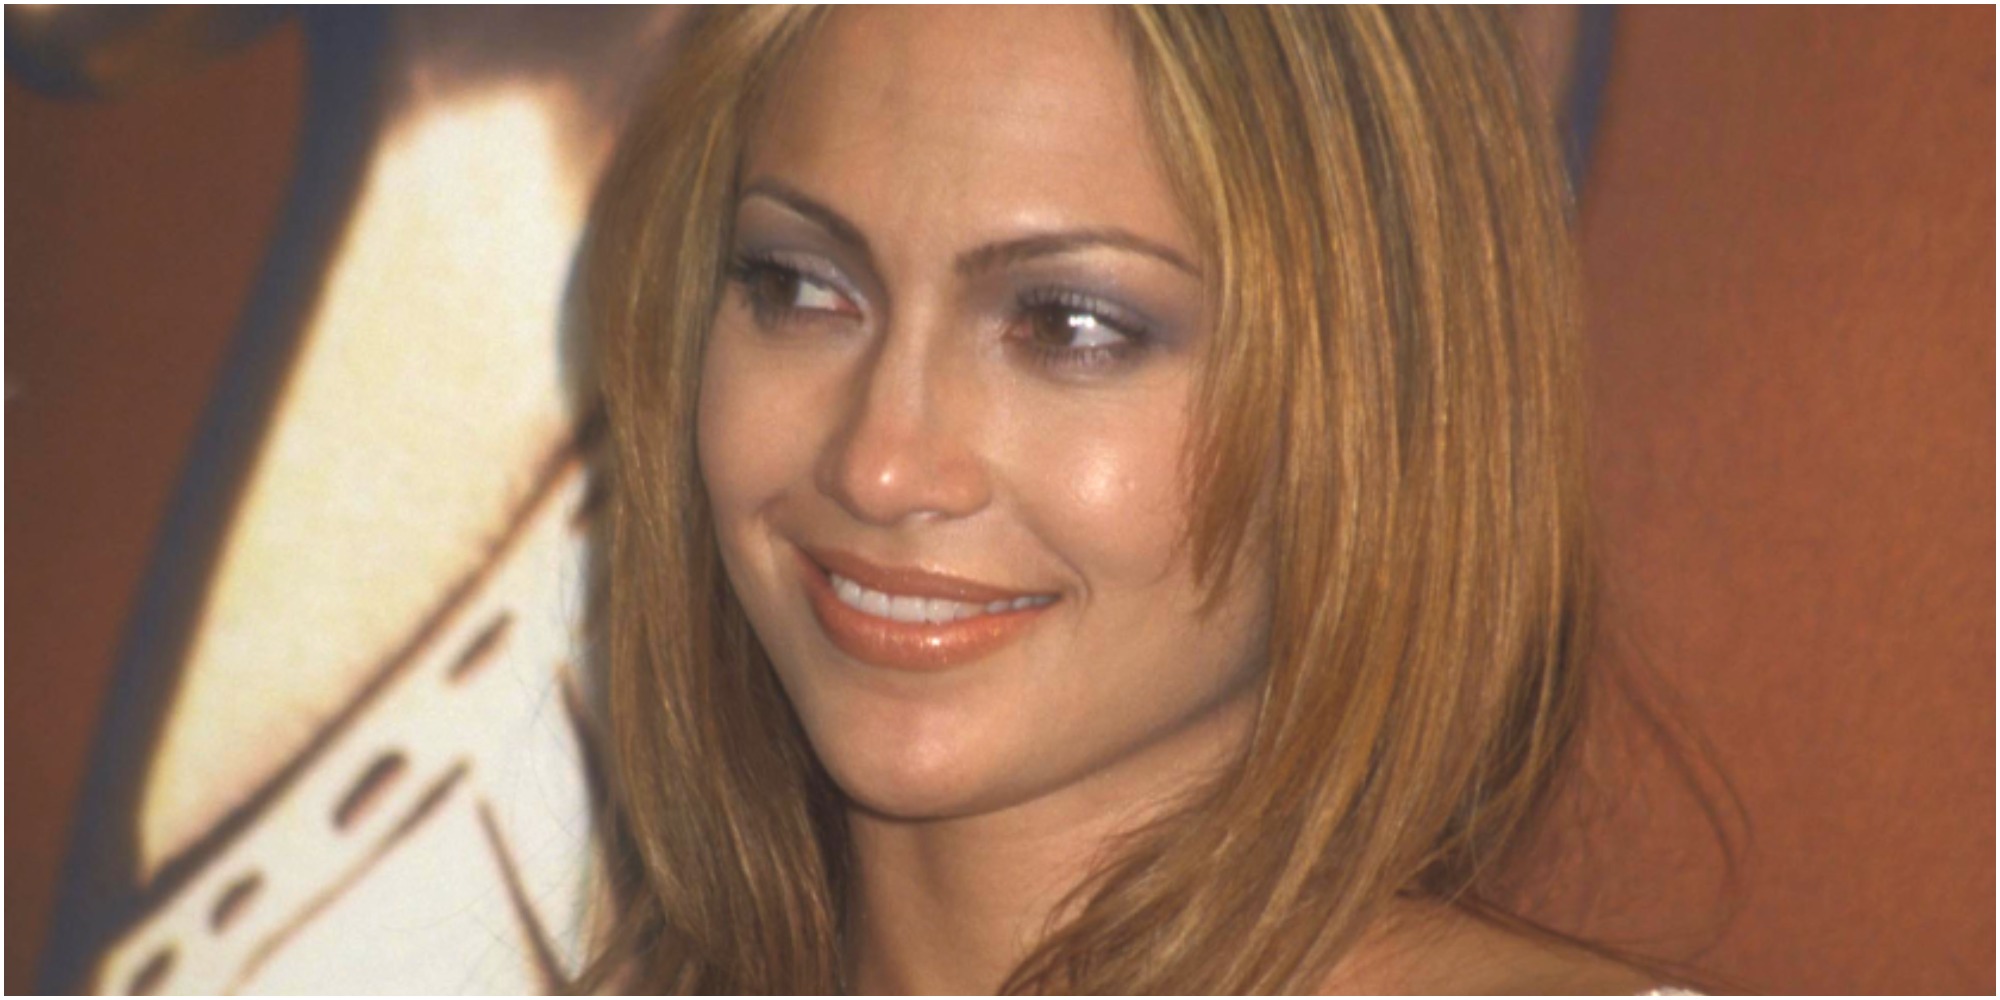 Jennifer Lopez pictured at the ALMA awards.